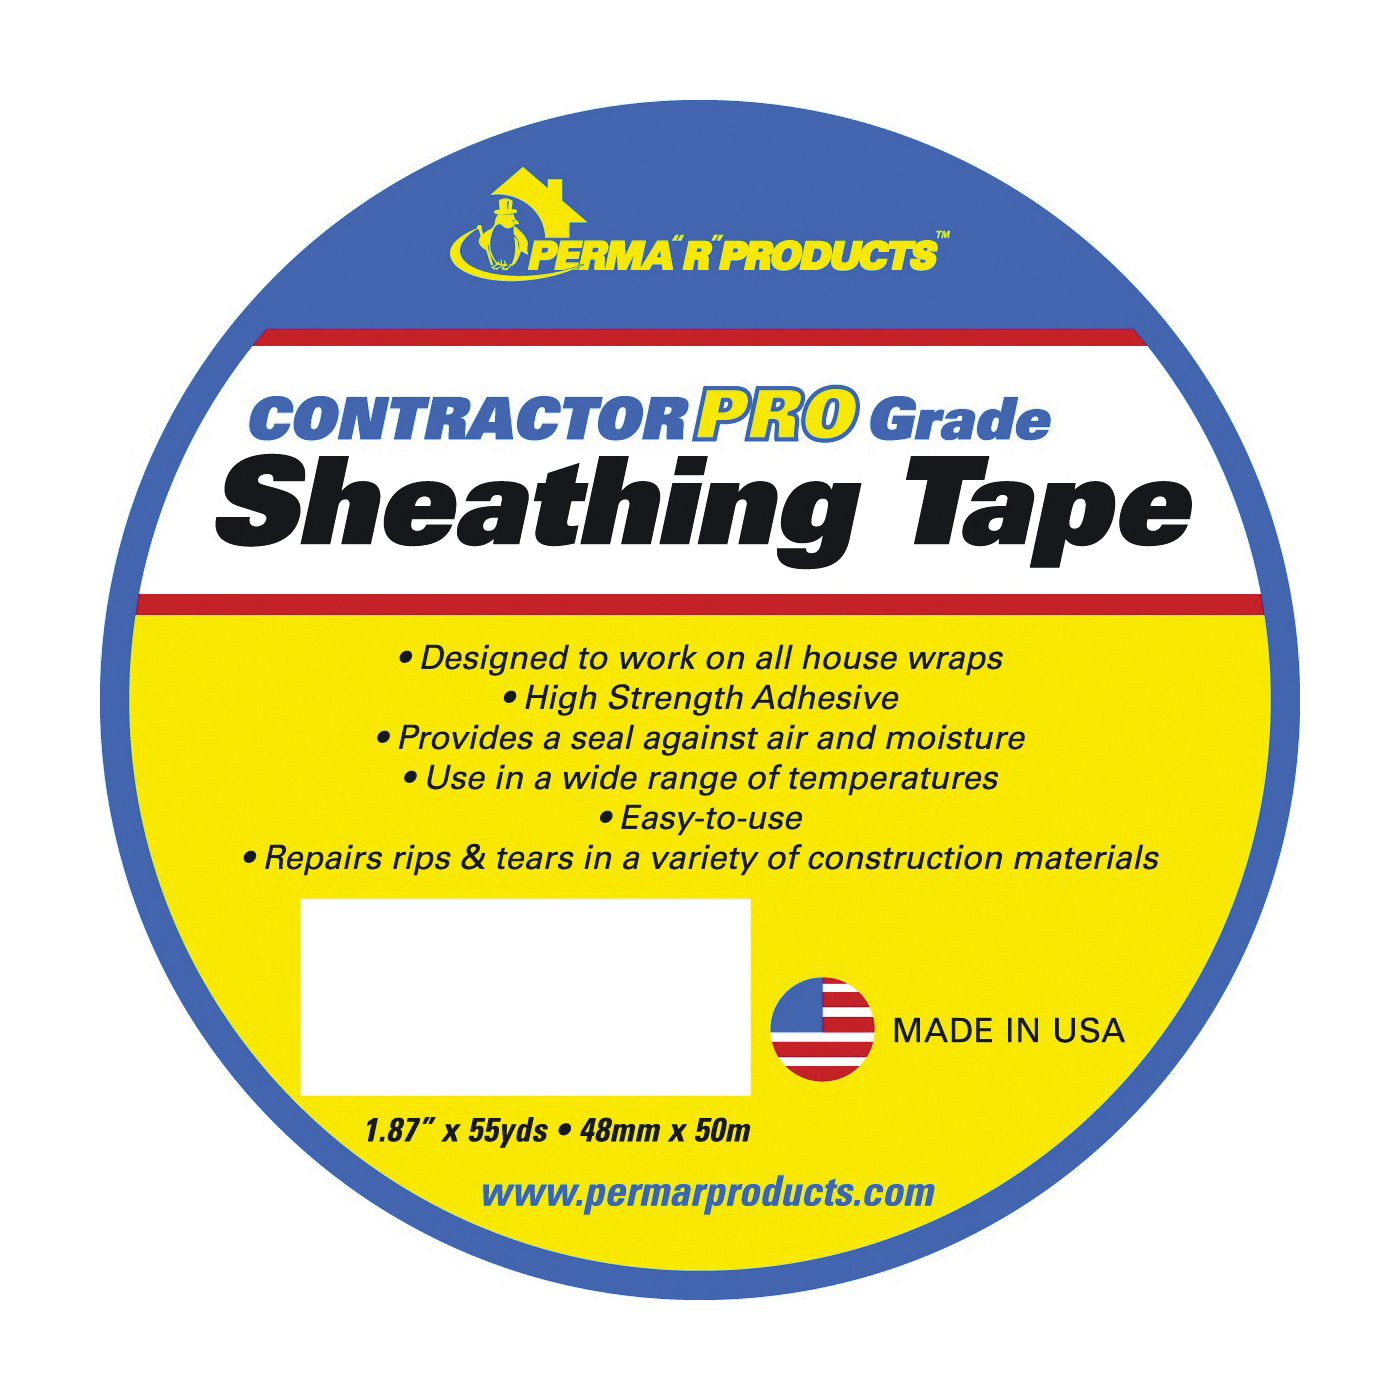 PERMA R PRODUCTS Contractor Pro Grade 18755 Sheathing Tape, 50 m L, 48 mm W, Polypropylene Backing, White - 1